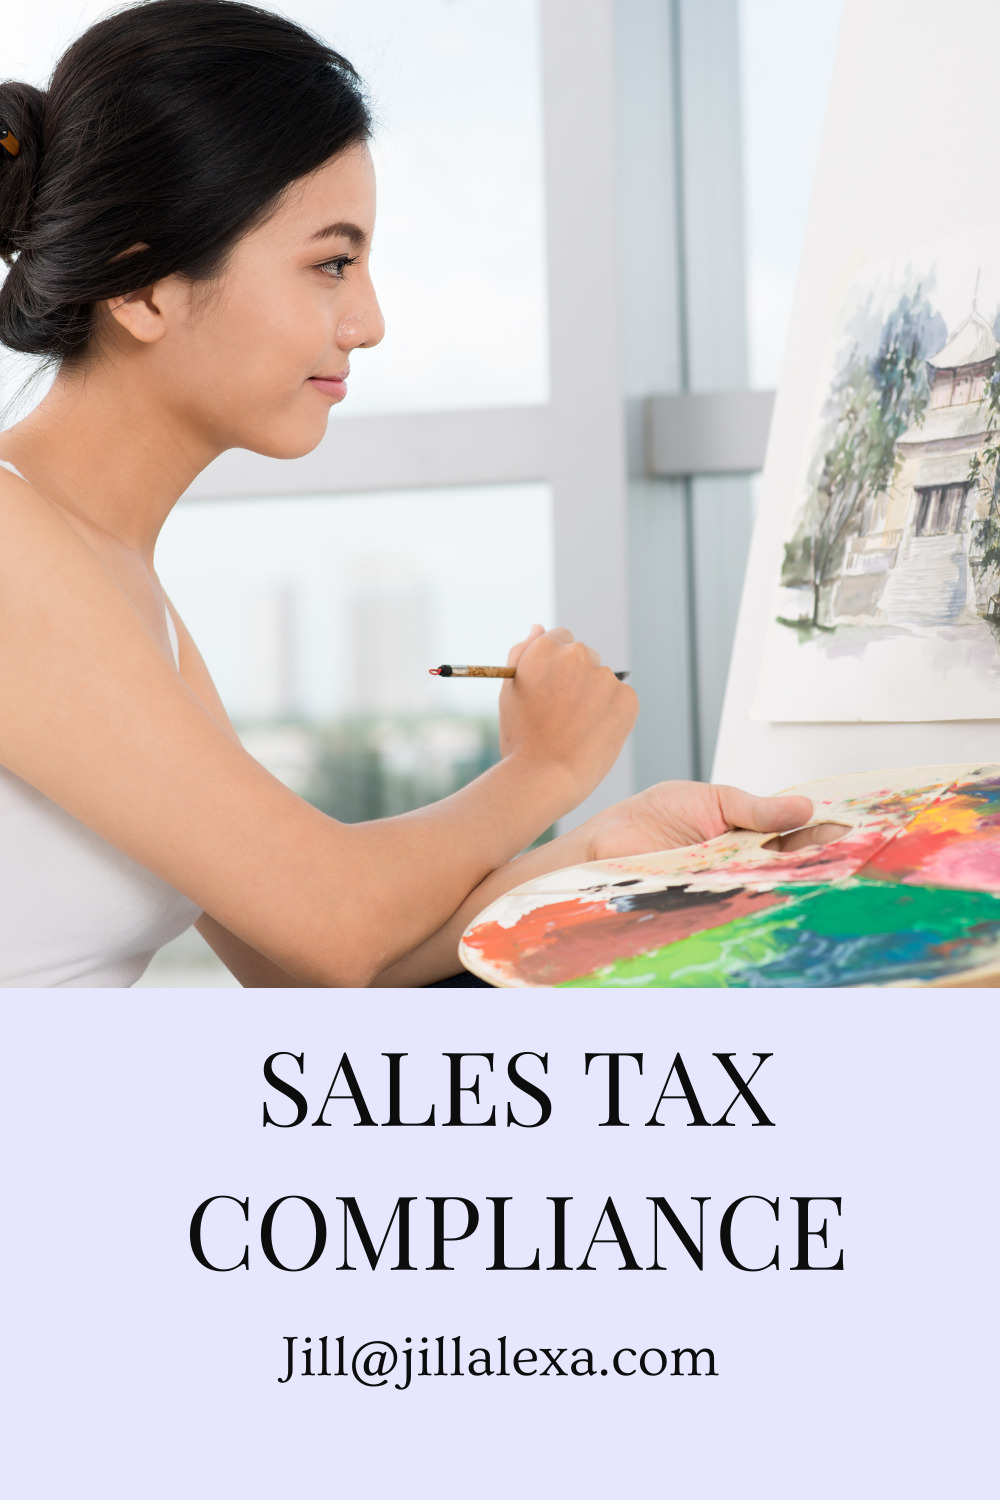 SALES TAX COMPLIANCE - Tips for Artists